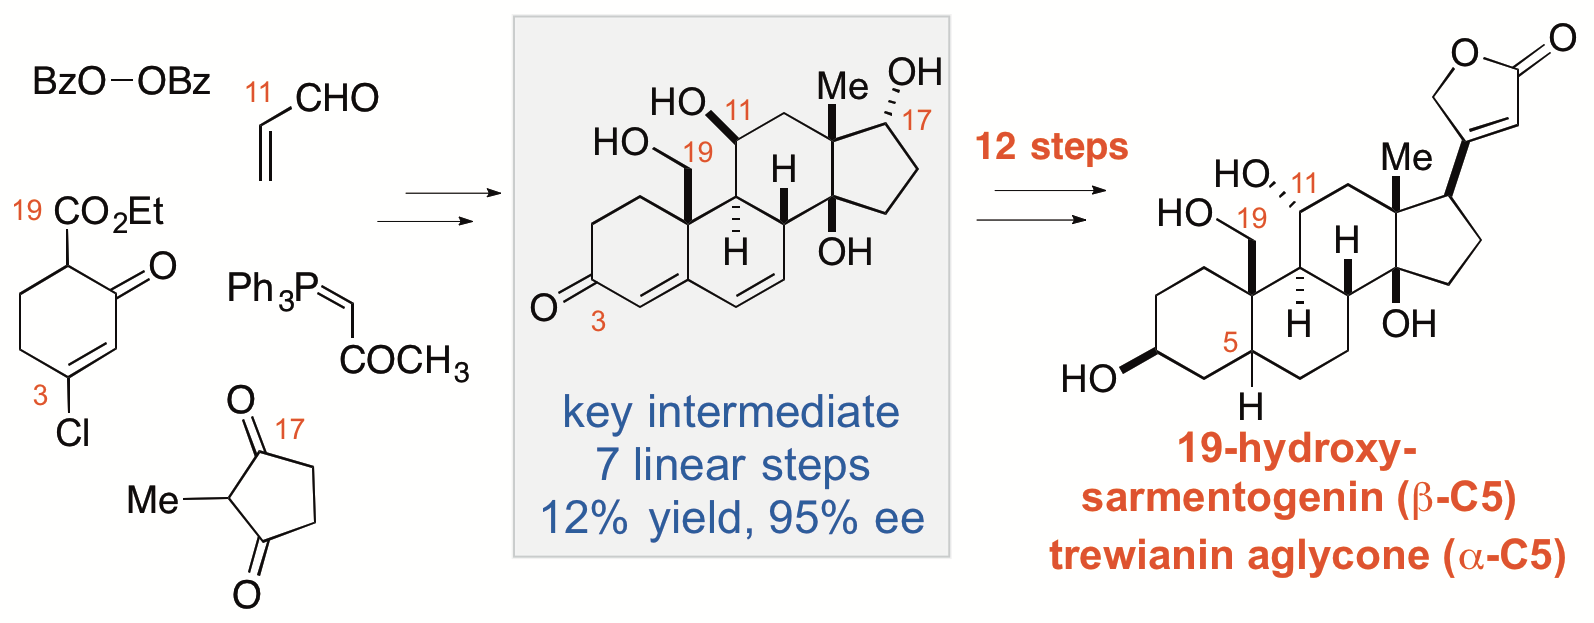 steroid synthesis2